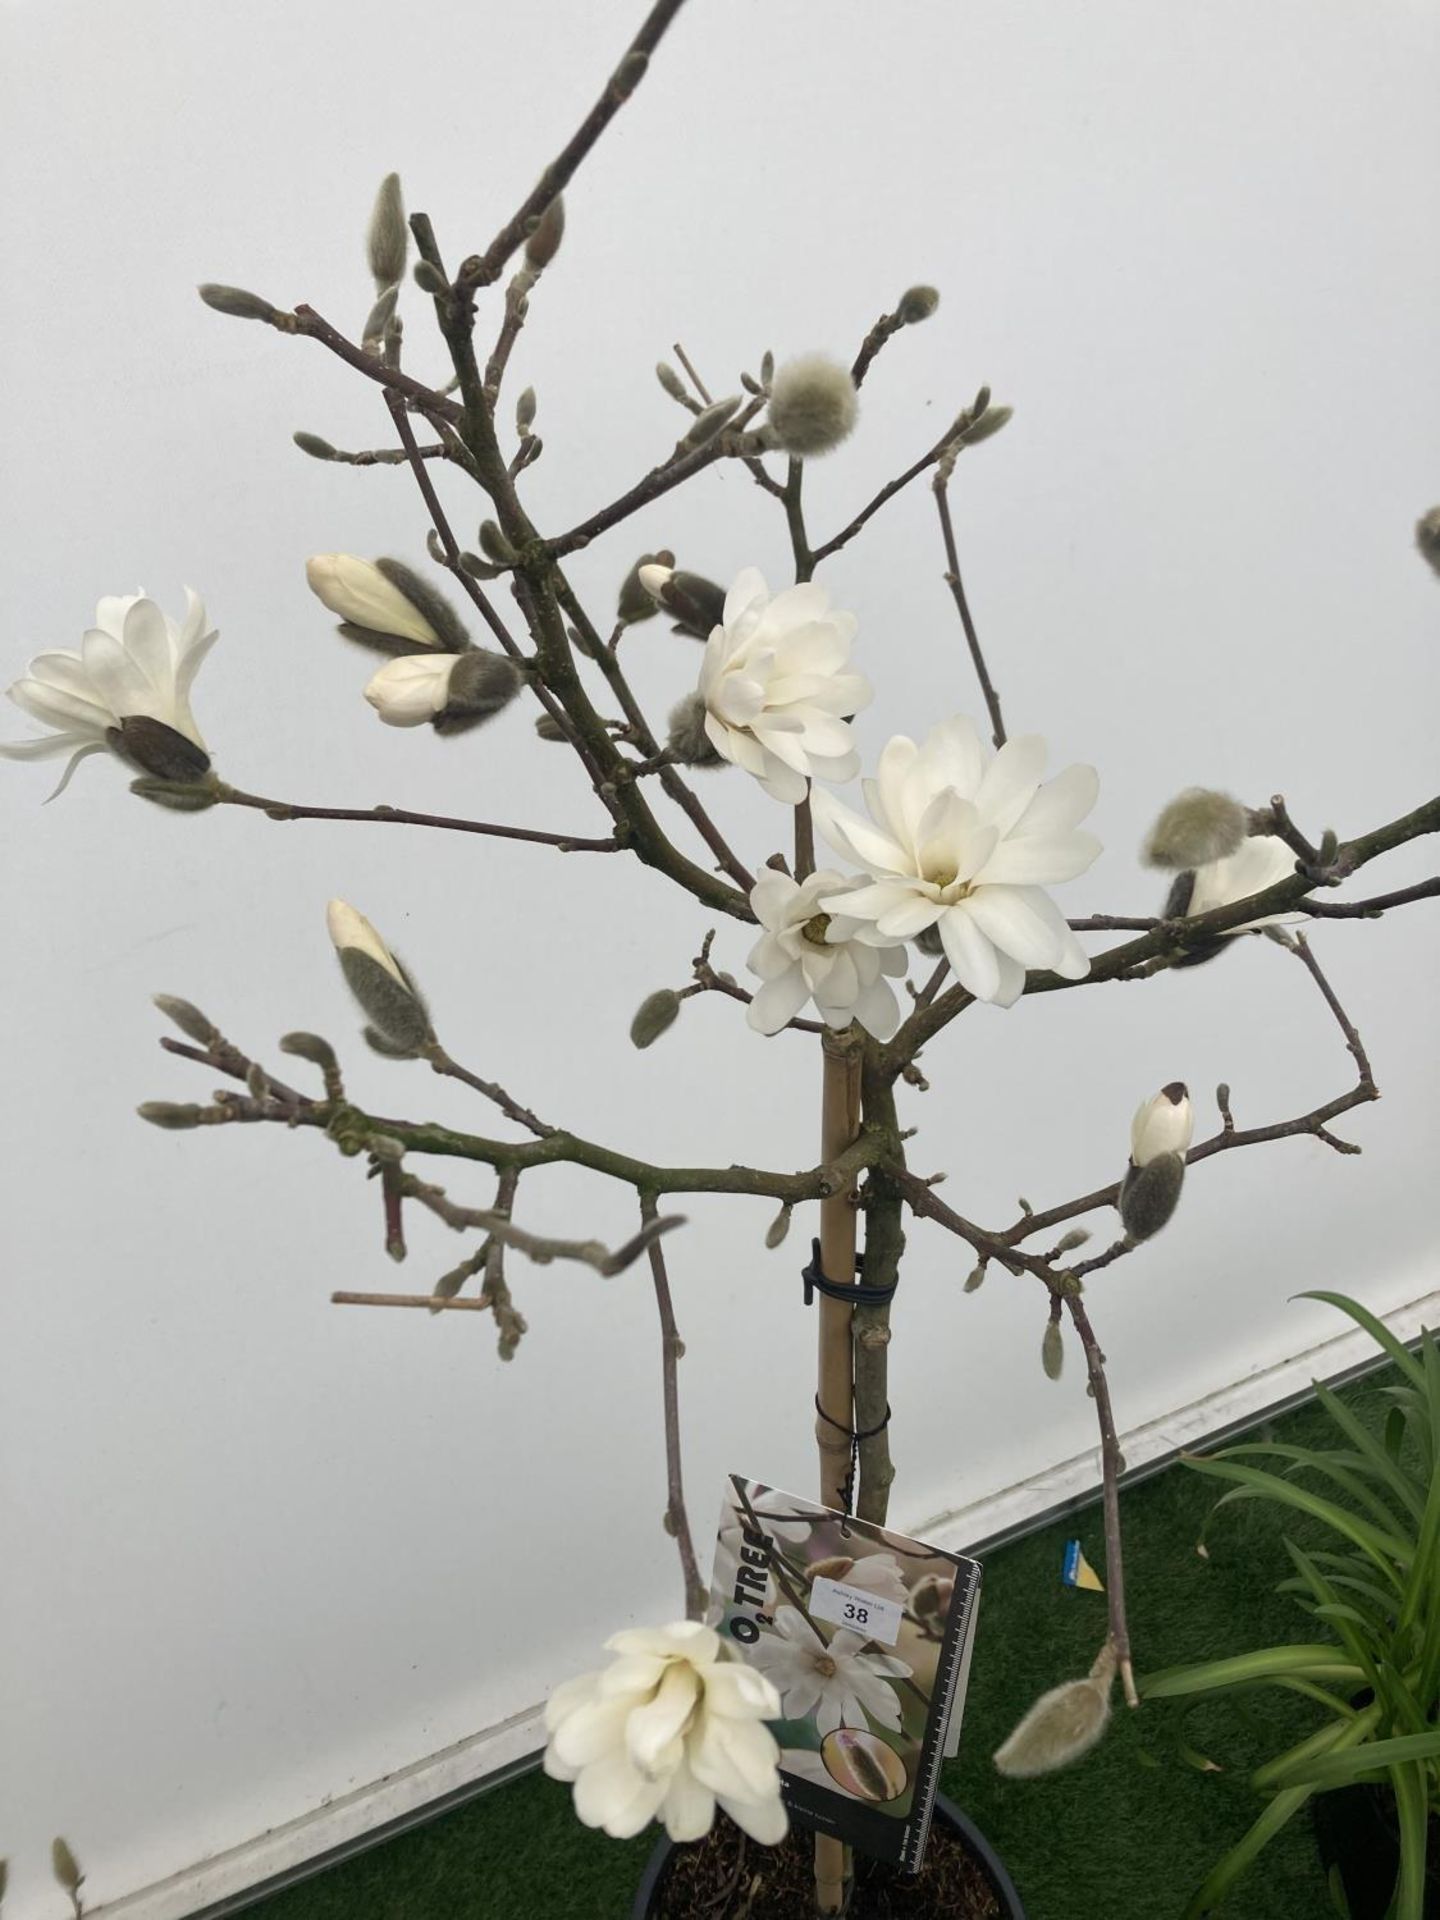 A STANDARD MAGNOLIA STELLATA TREE OVER 160CM TALL IN A 10 LTR POT PLUS VAT - Image 2 of 5